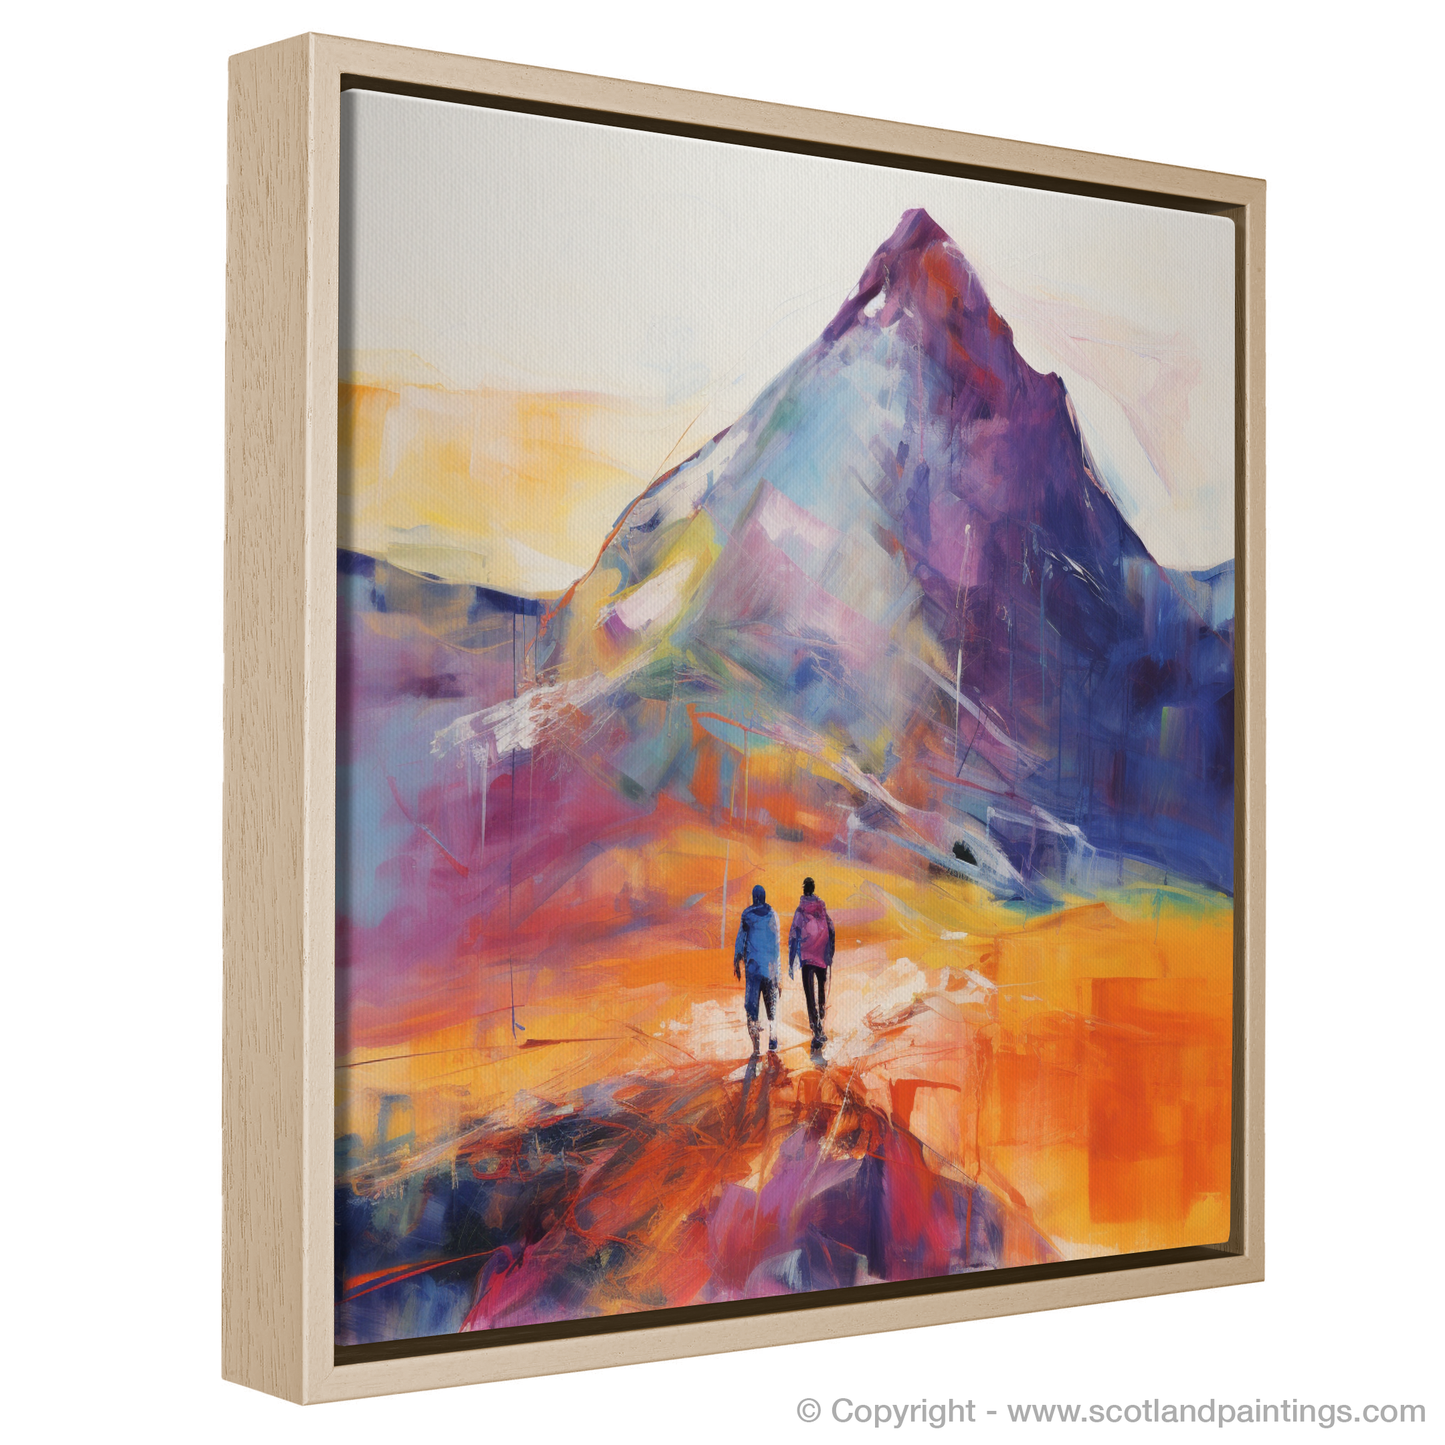 Painting and Art Print of Hikers in Glencoe entitled "Hikers' Odyssey in Glencoe's Kaleidoscope".